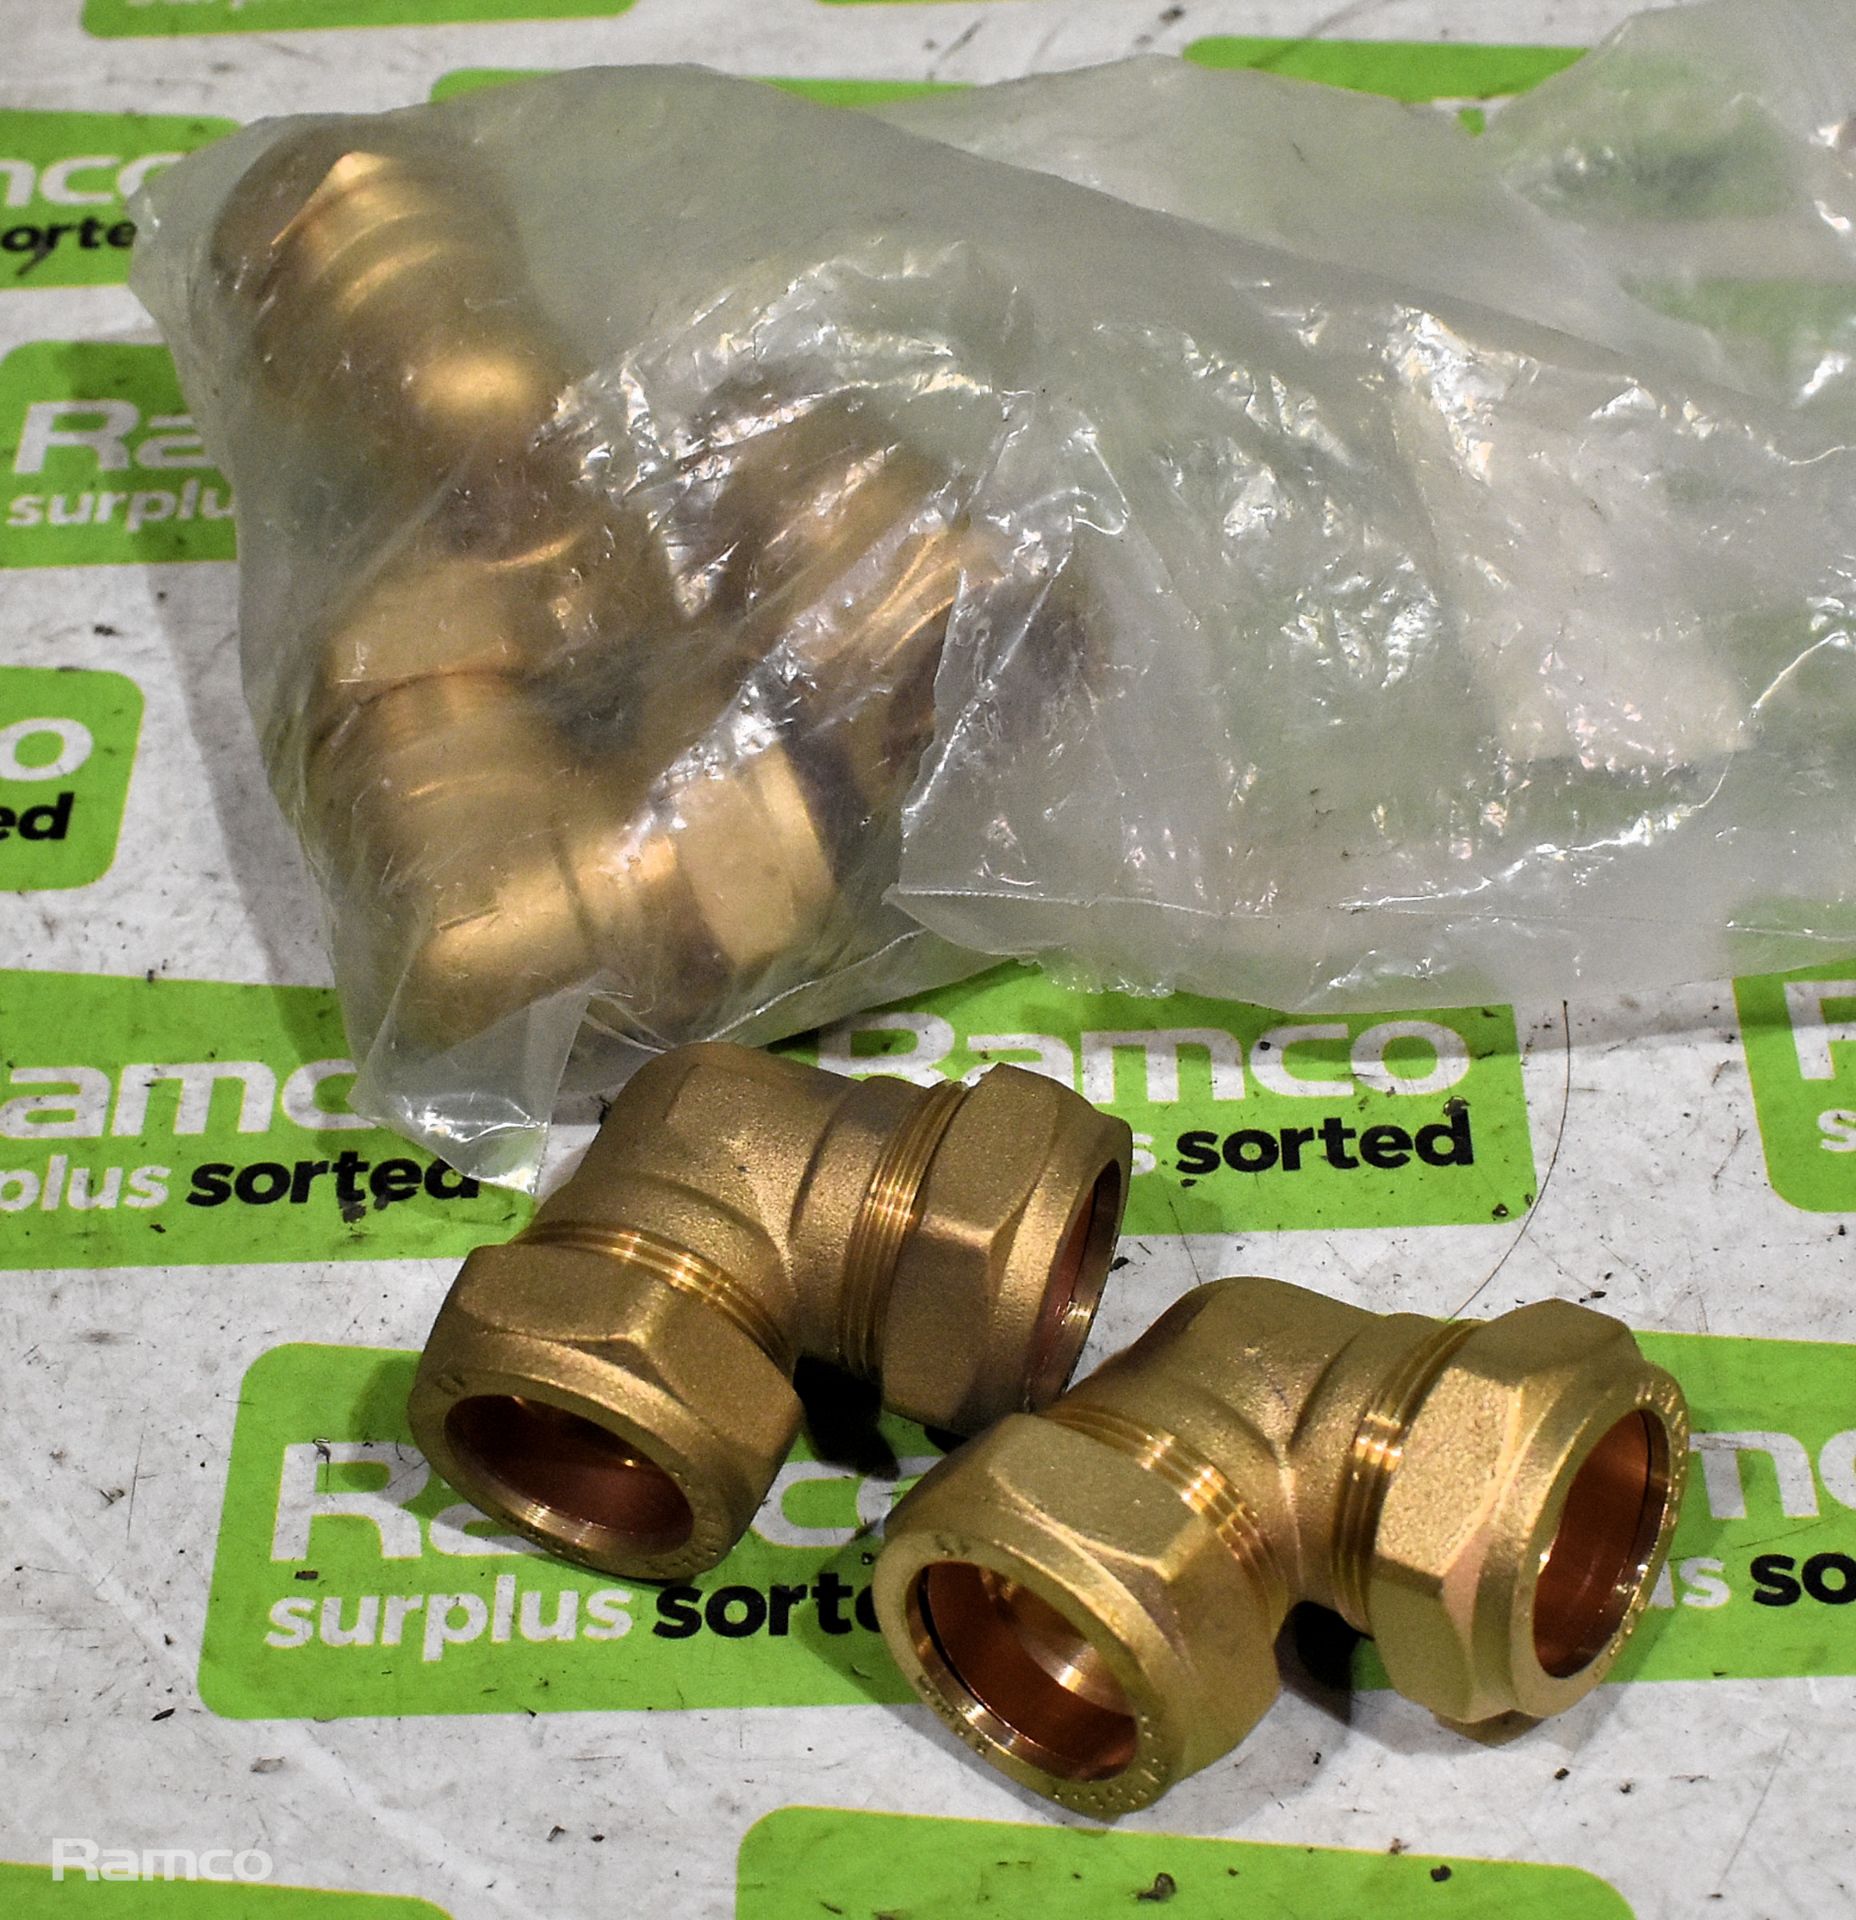 4x 2 1/2 inch instantaneous male/female 90° bend connector, Box of assorted brass wade fittings - Bild 12 aus 14